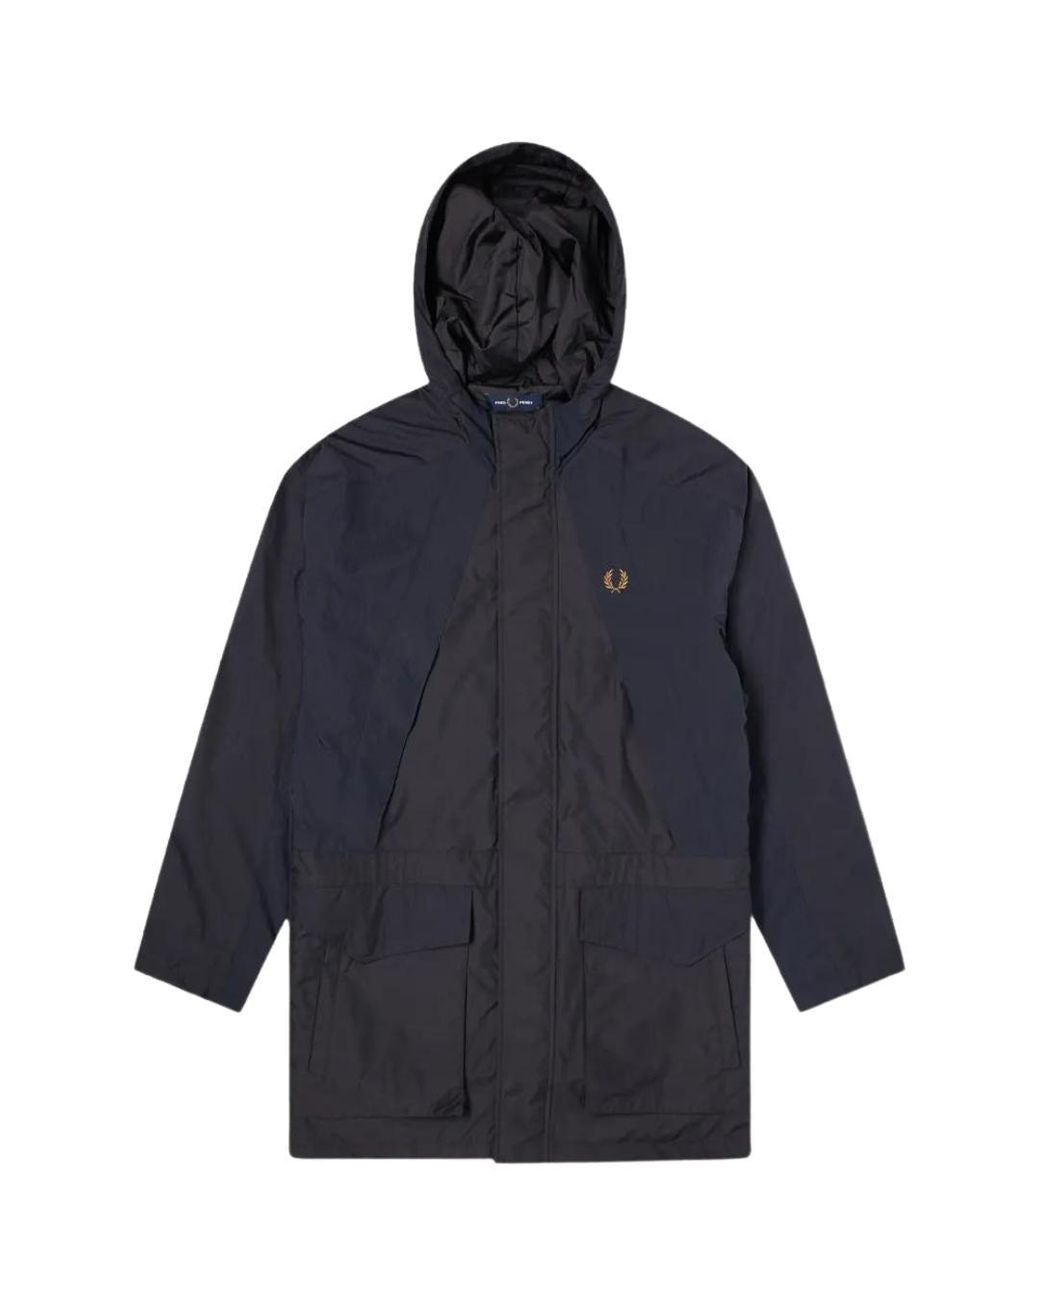 Fred Perry J1526 608 Navy Blue Hooded Parka Jacket for Men | Lyst